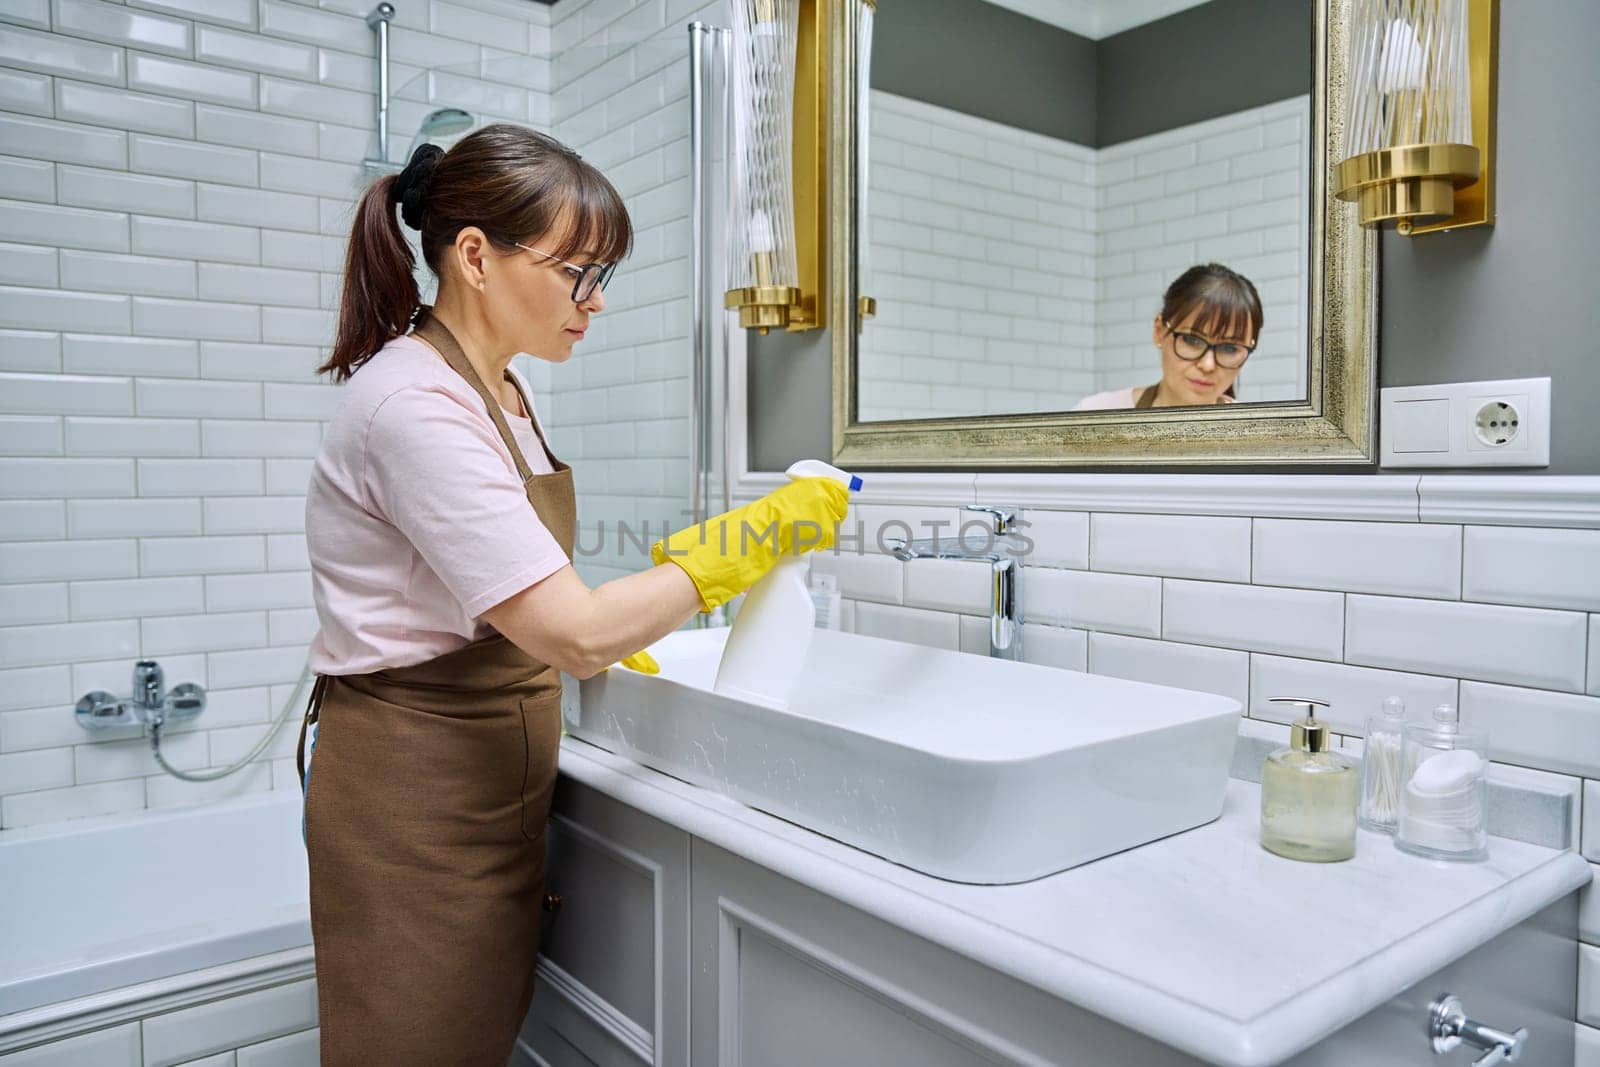 Woman in apron with detergent washcloth cleaning in bathroom, washing sink washbasin. Housewife cleaning house, cleaner service worker at workplace. Home hygiene housecleaning housekeeping housework